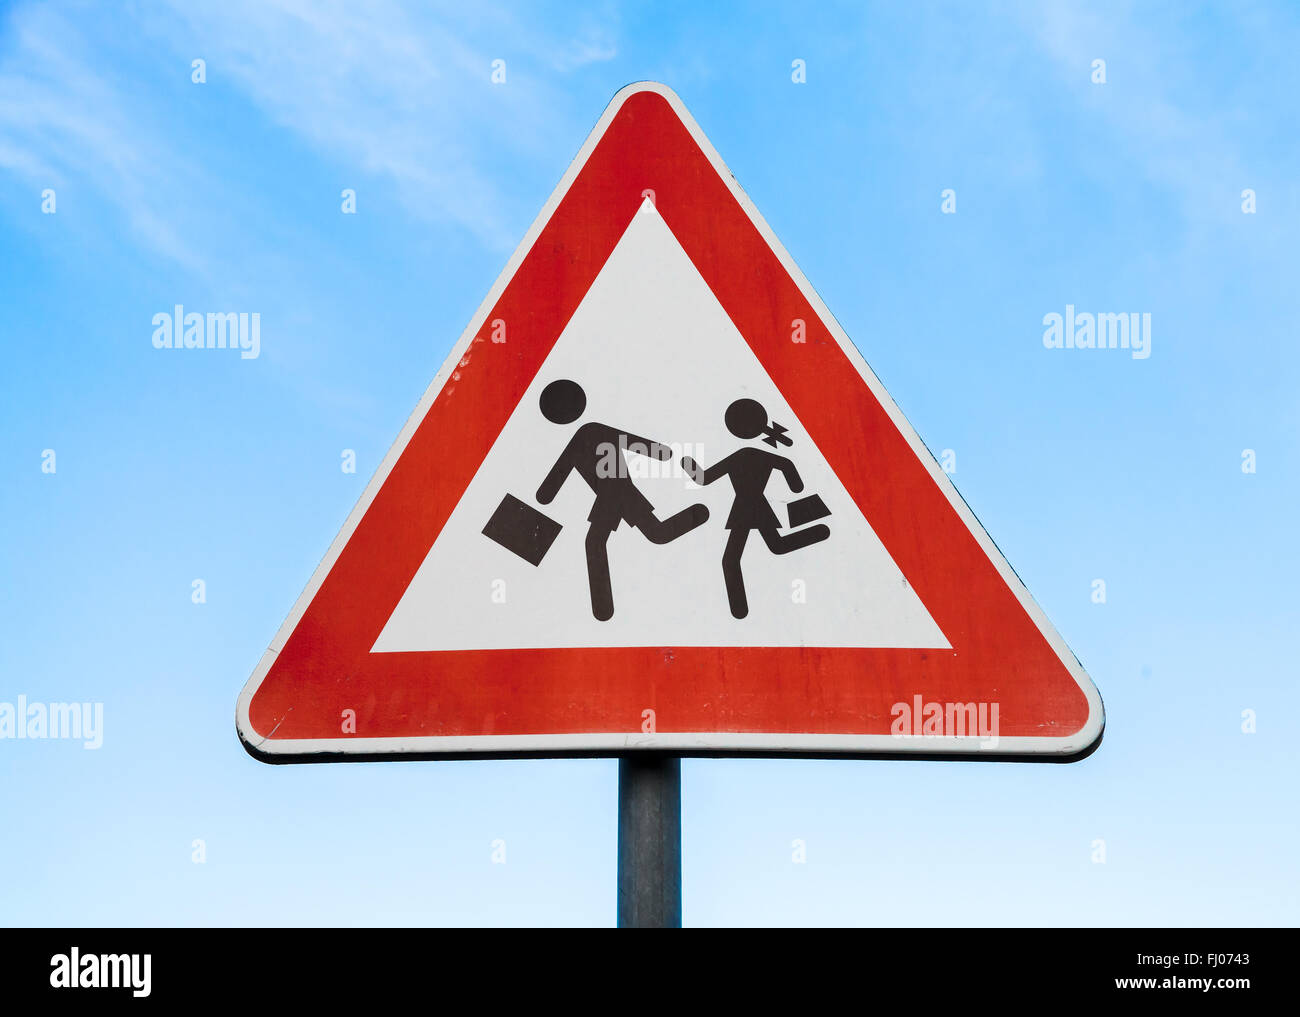 Road sign caution children over blue sky background Stock Photo